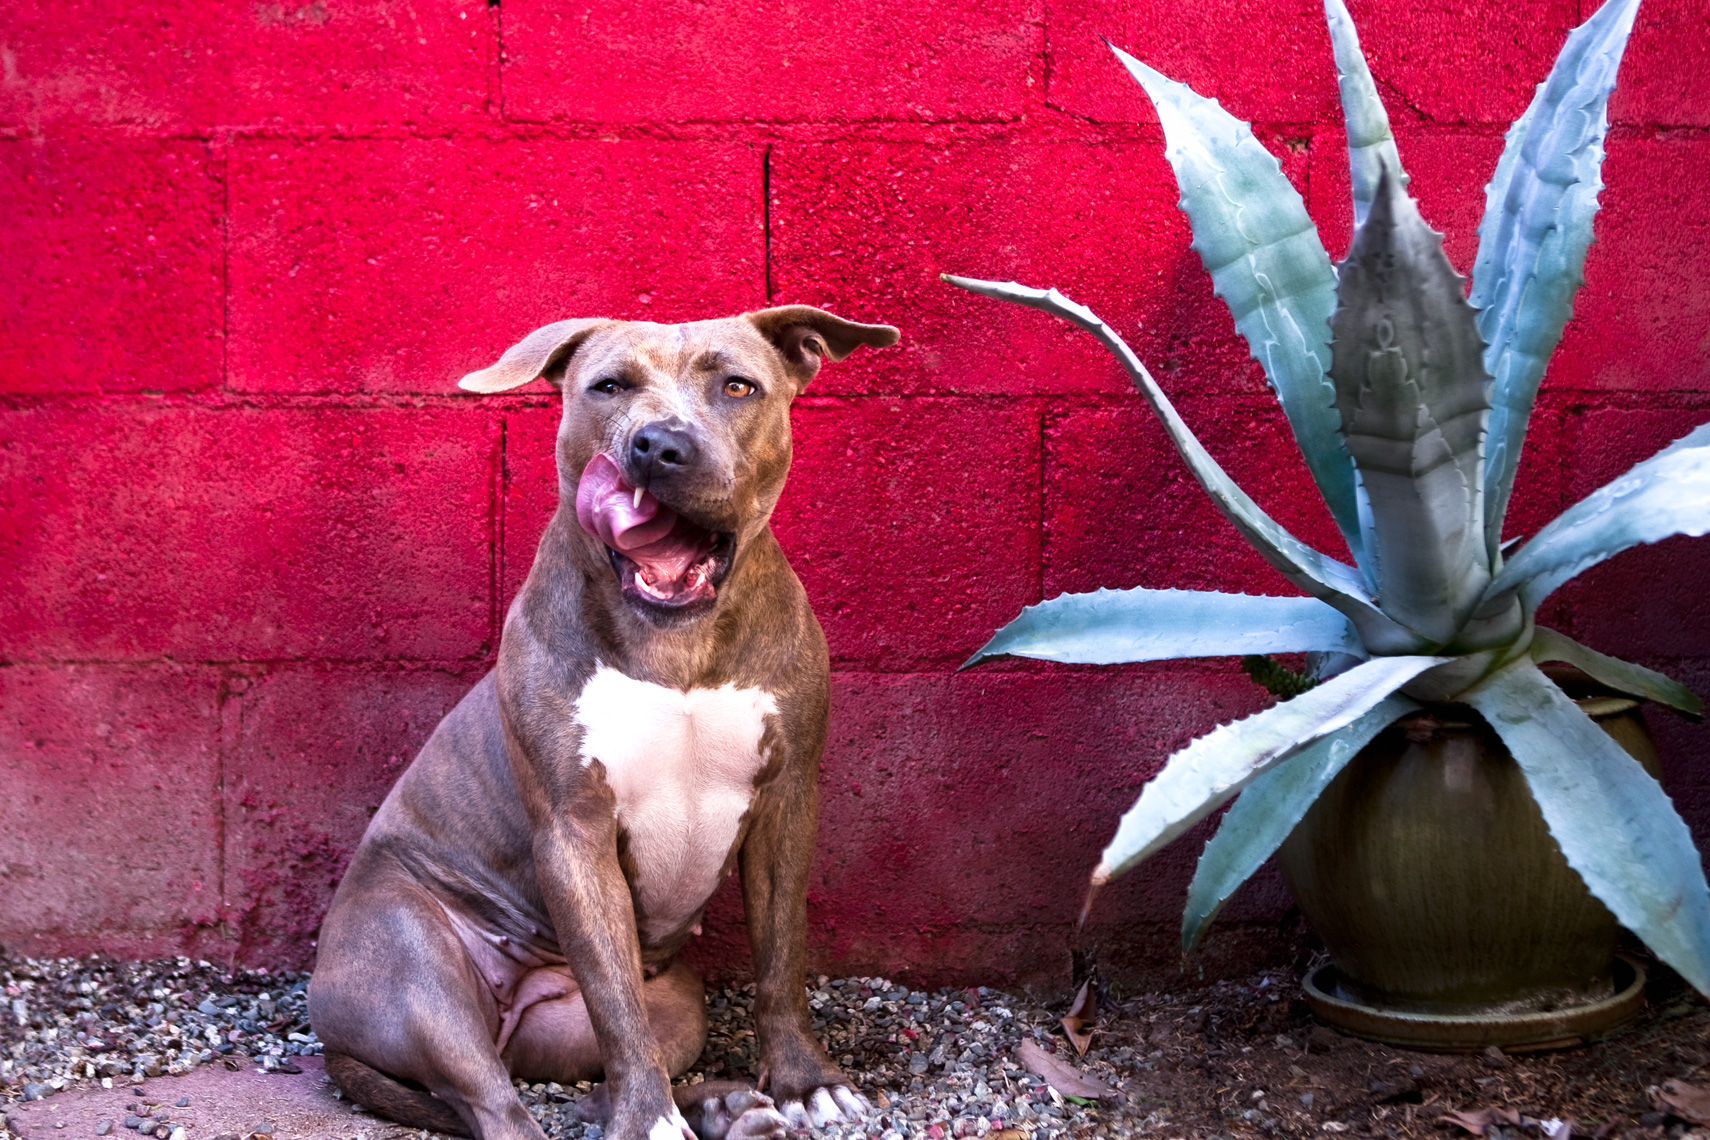 Los Angeles Dog Photography, Michael Brian, Pit Bull Chouka licking chops against red wall with Aloe plant